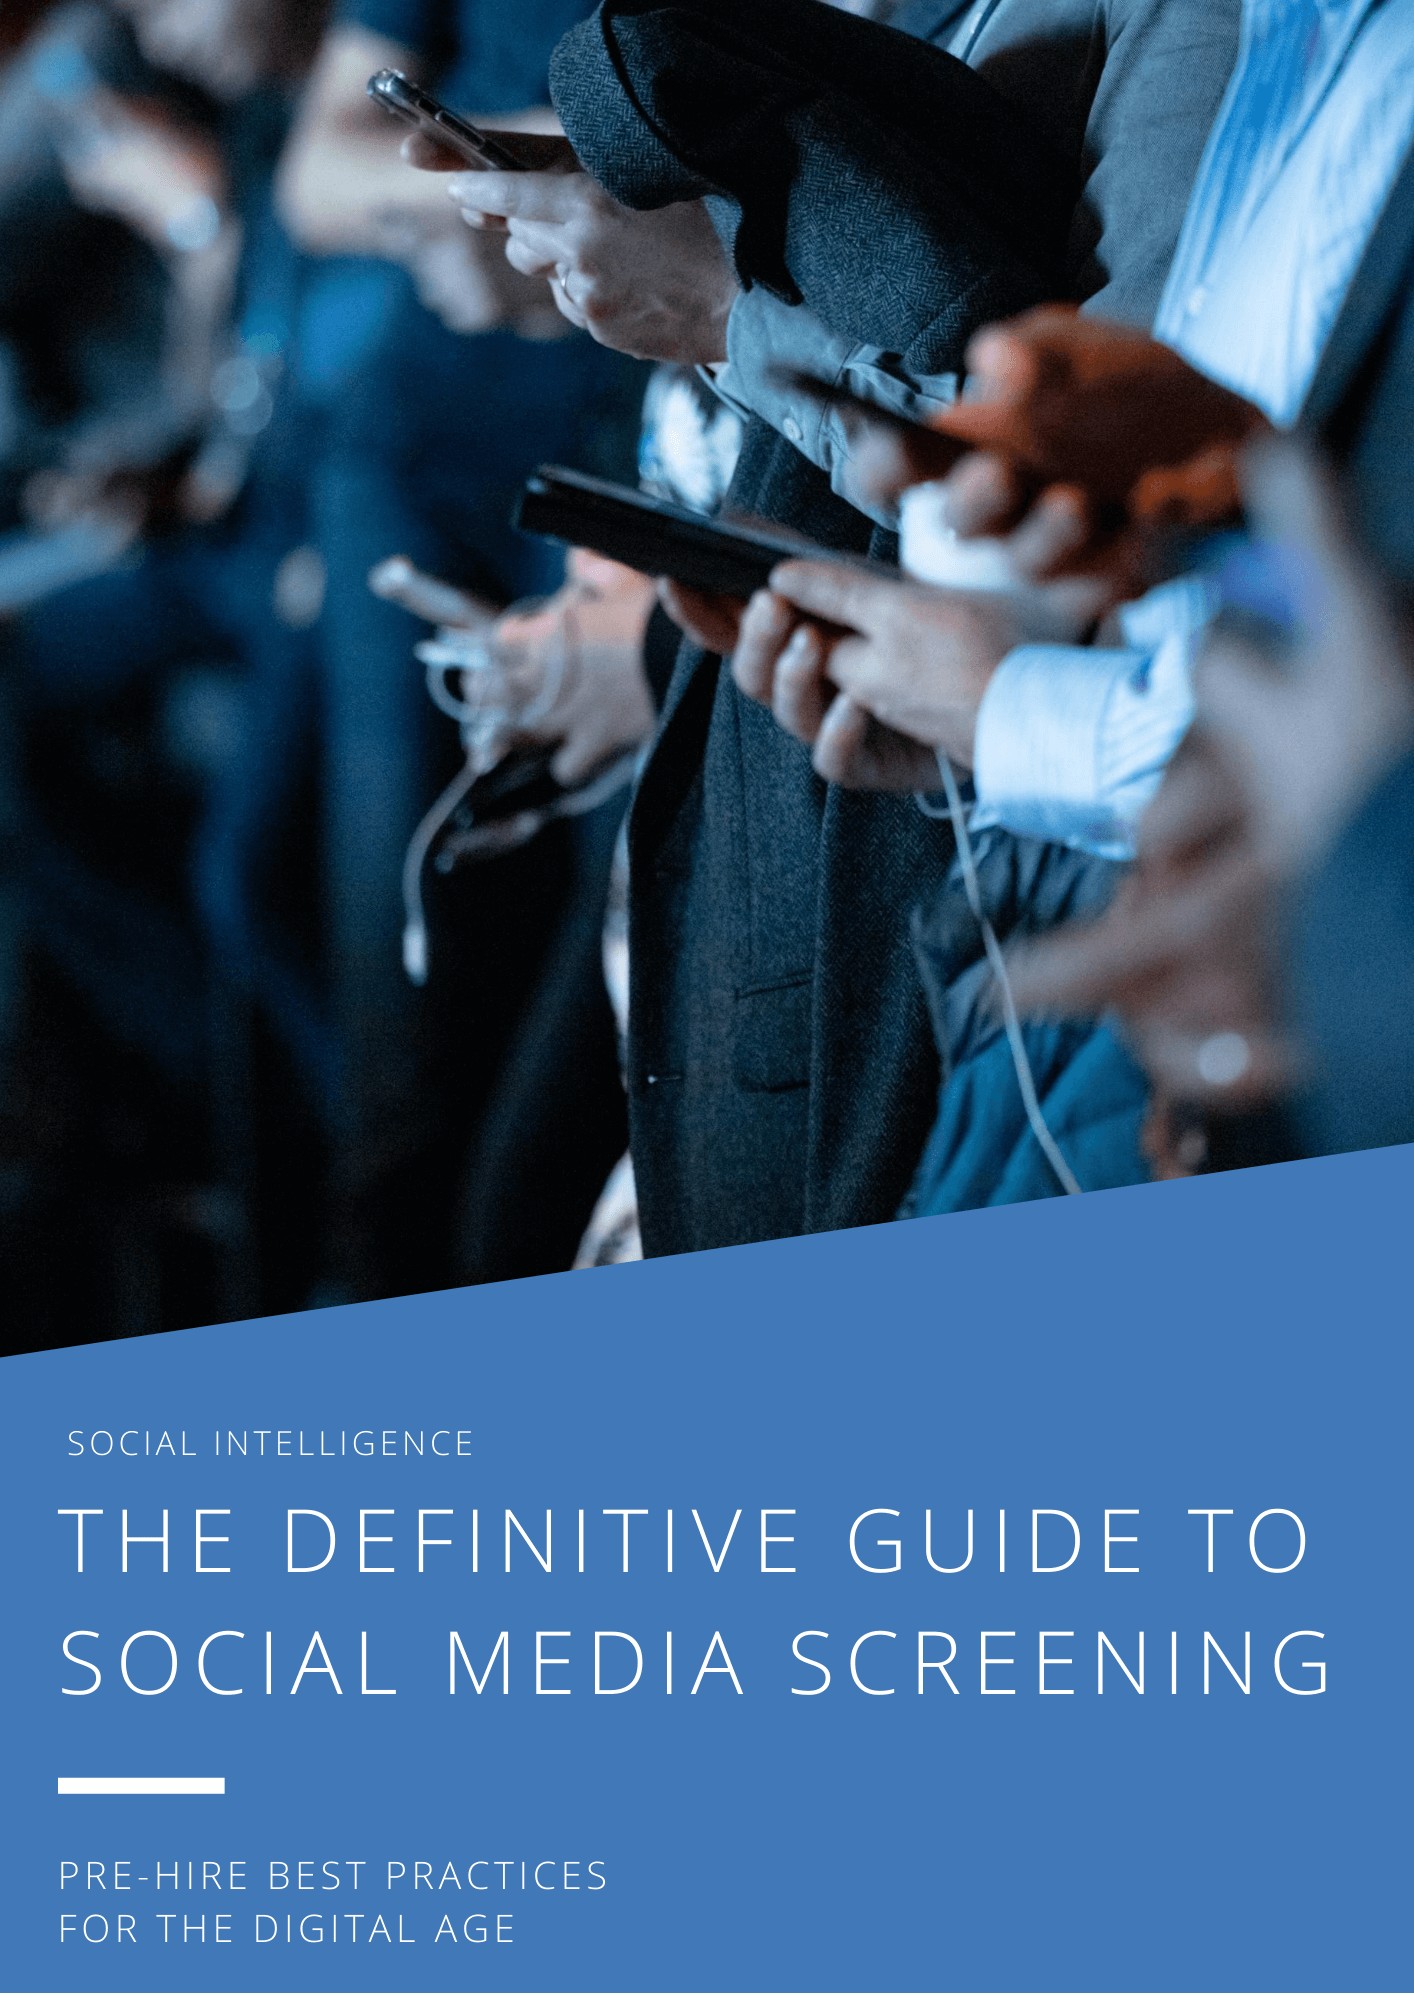 The Definitive Guide, Social Media Screening Cover